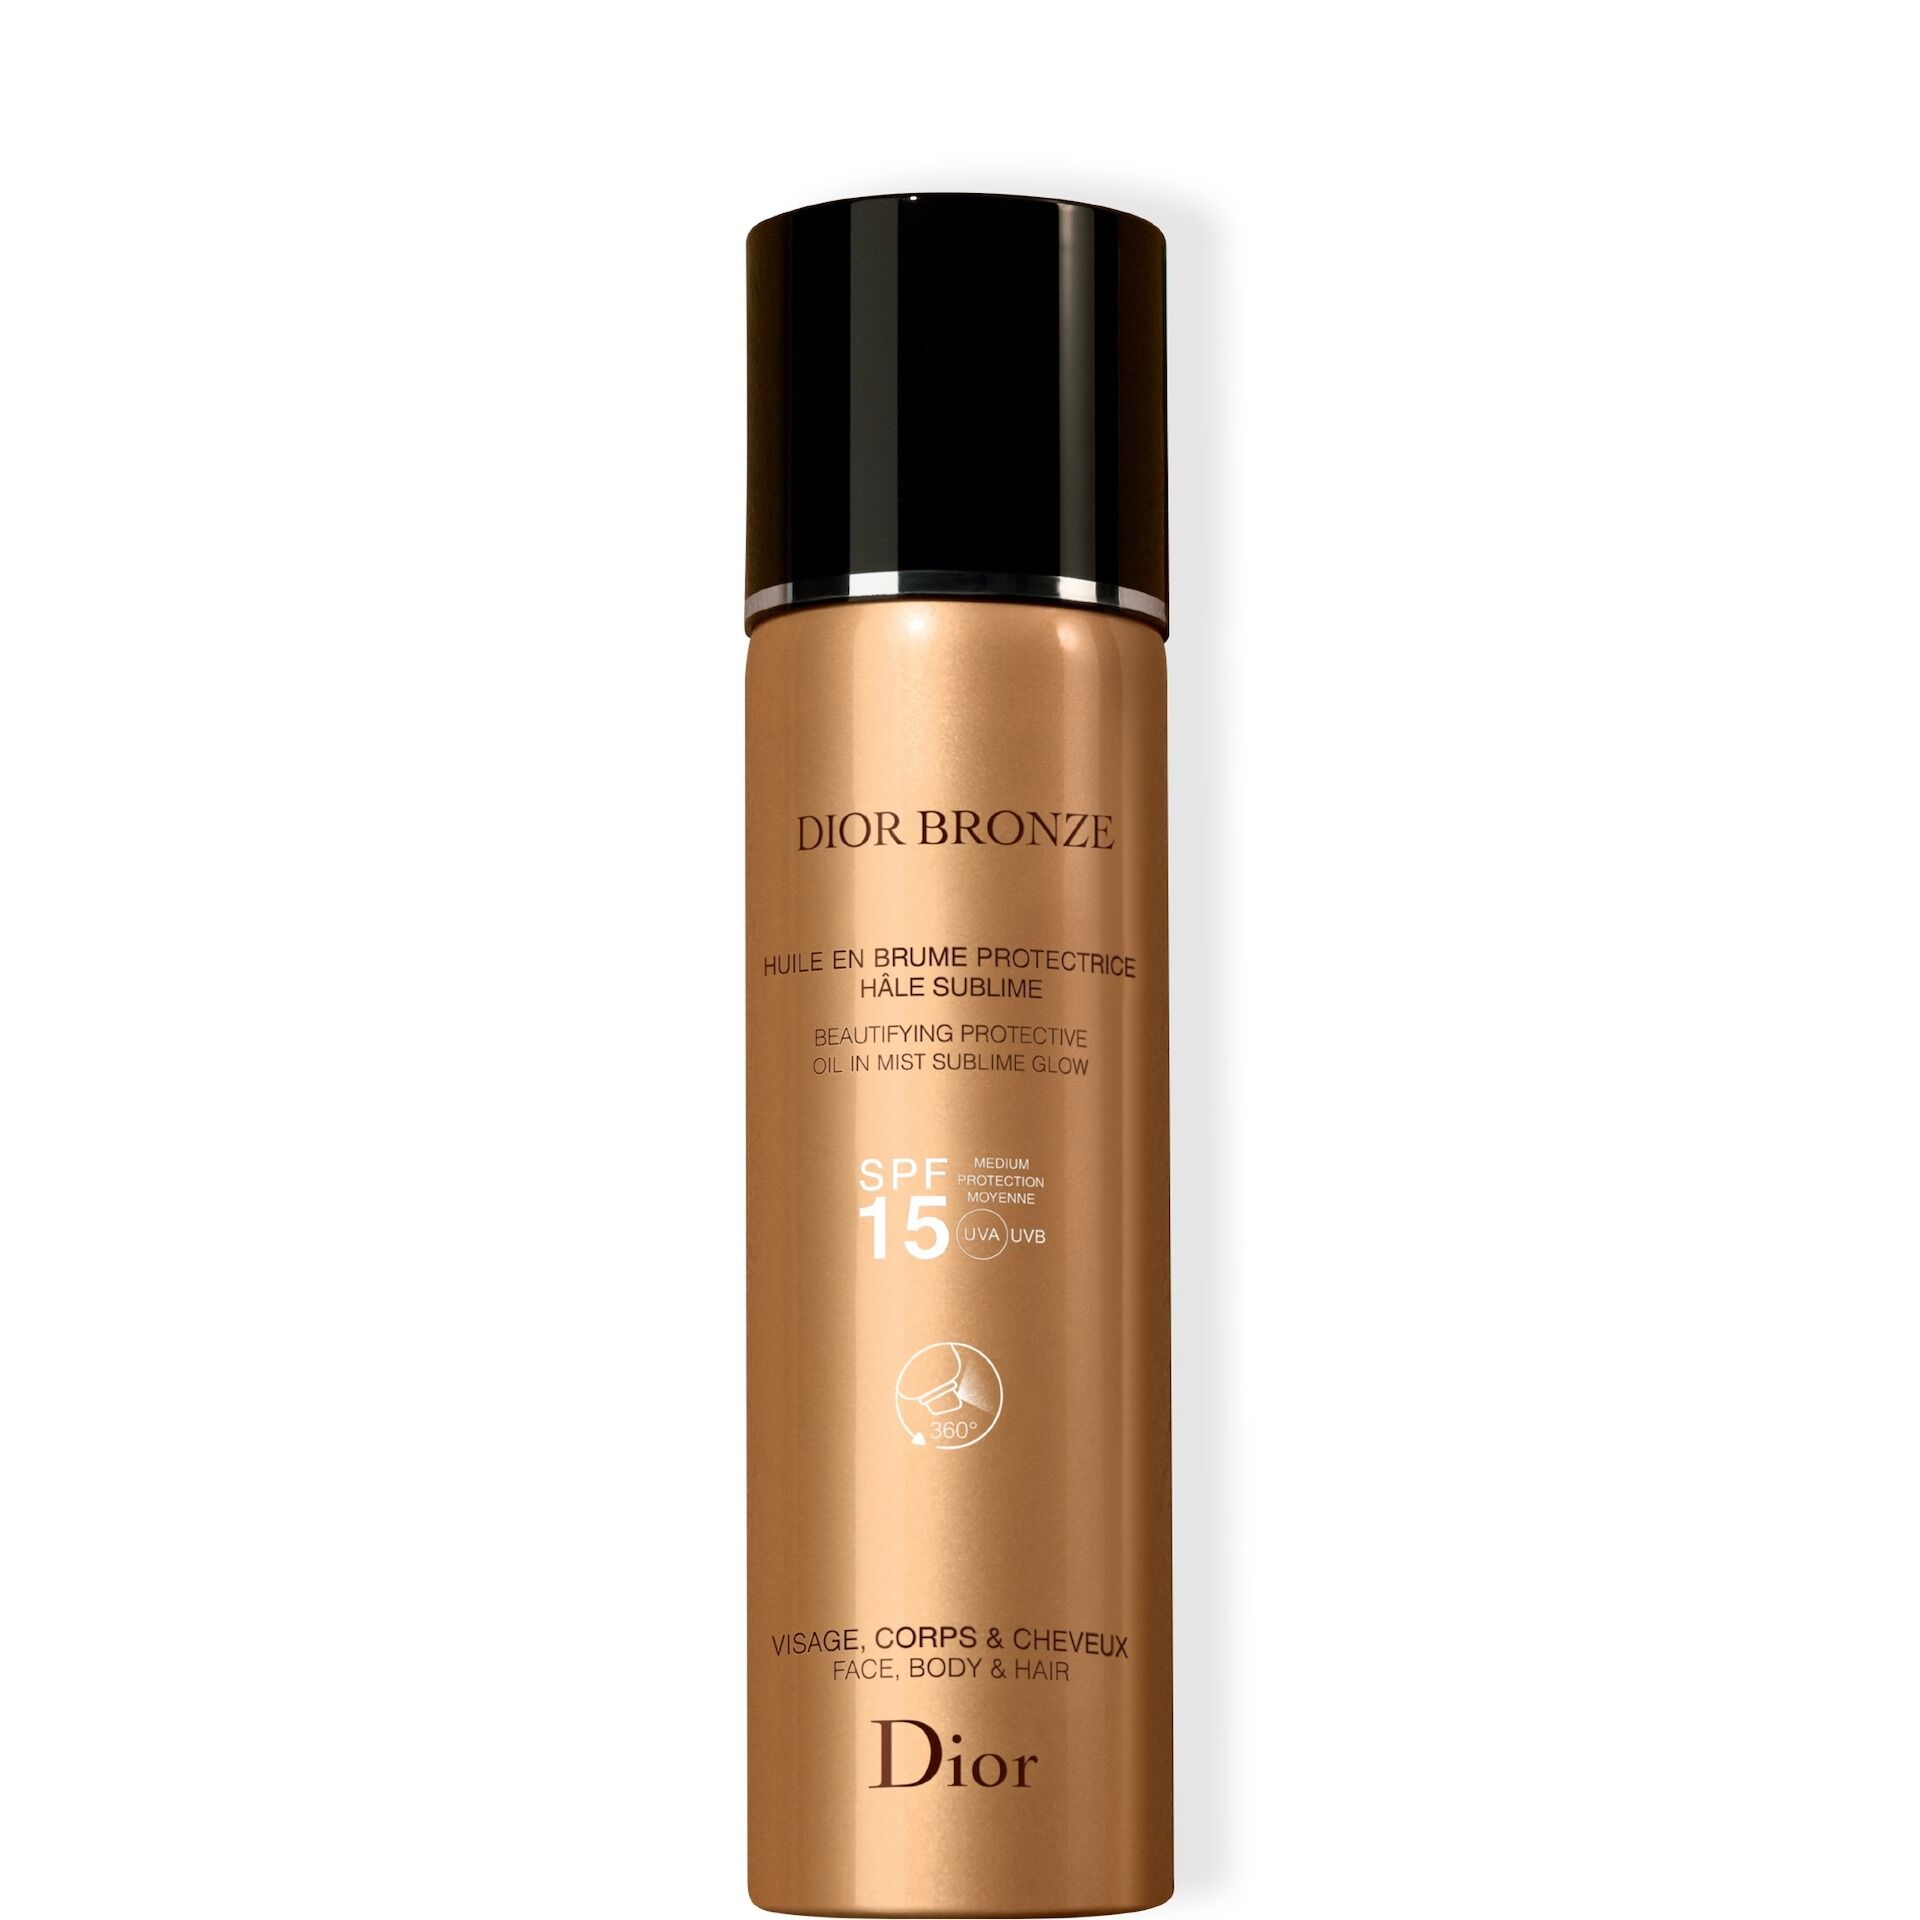 Christian Dior Bronze Beautifying Protective Oil-In-Mist Spf15